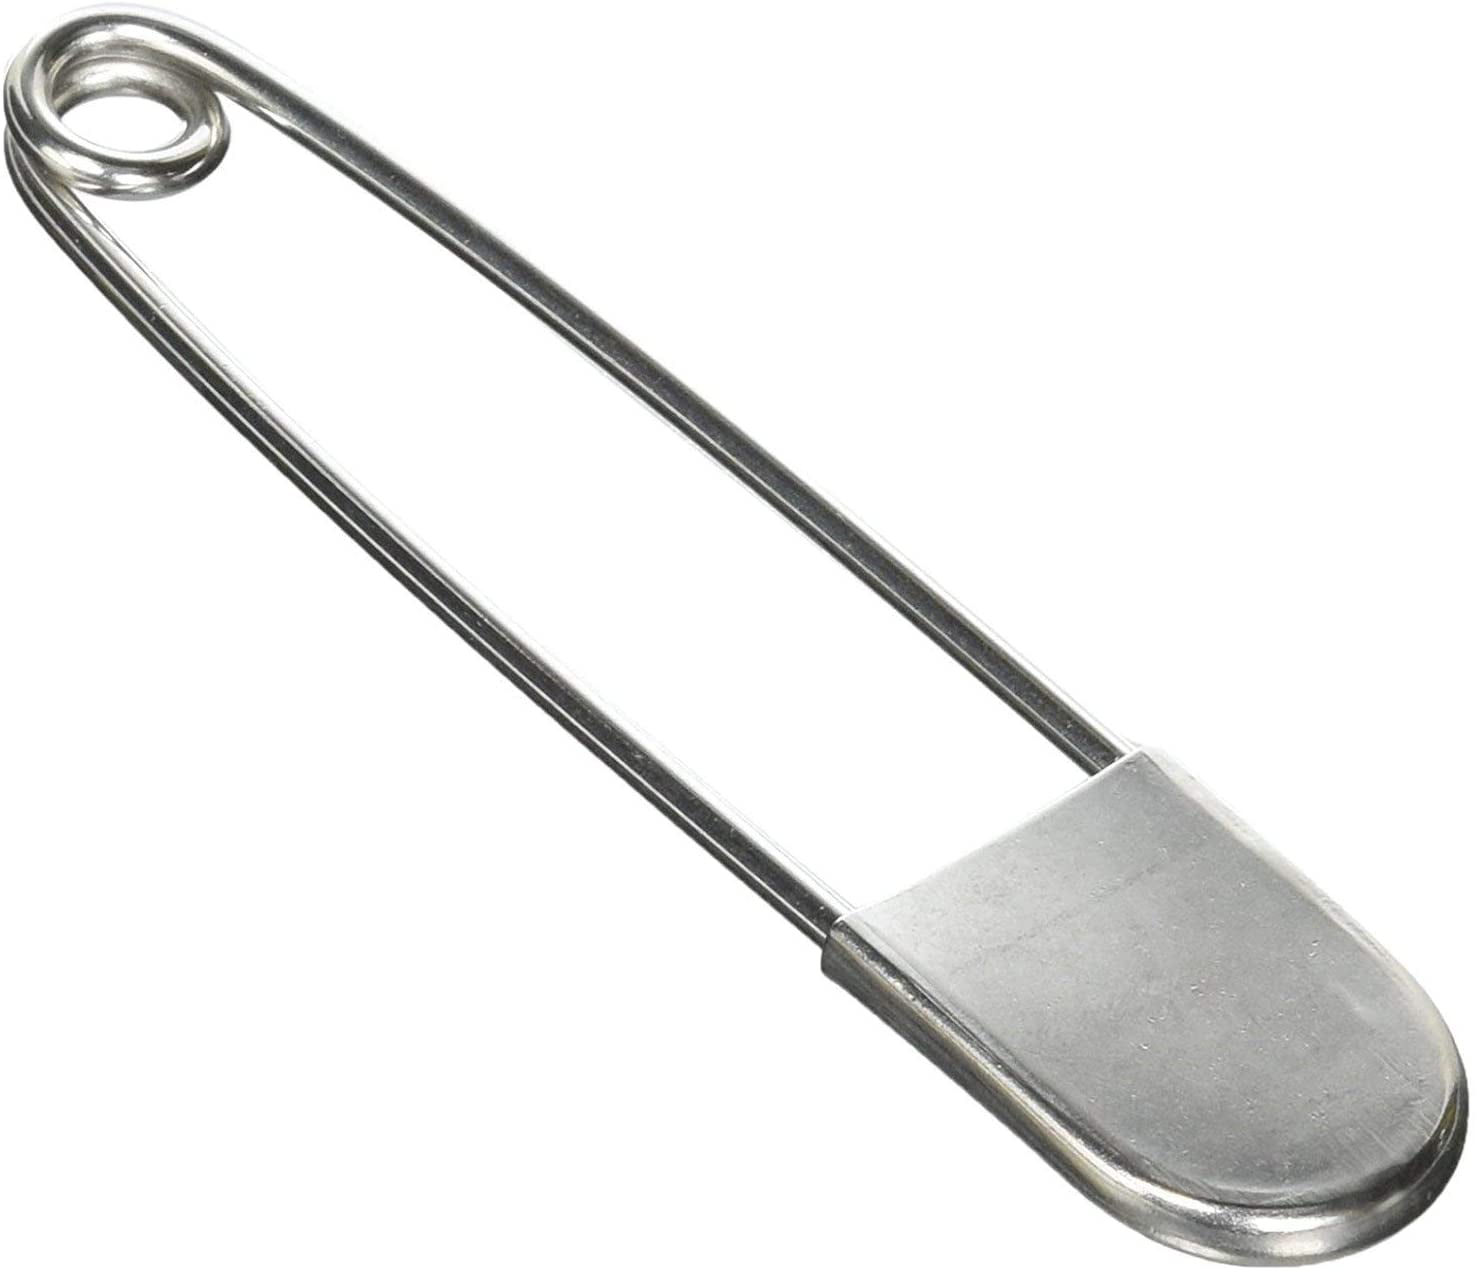 Heavy Duty Extra Large Safety Pins for Blankets, Skirts, Kilts, Crafts 2pcs(5.04inch)